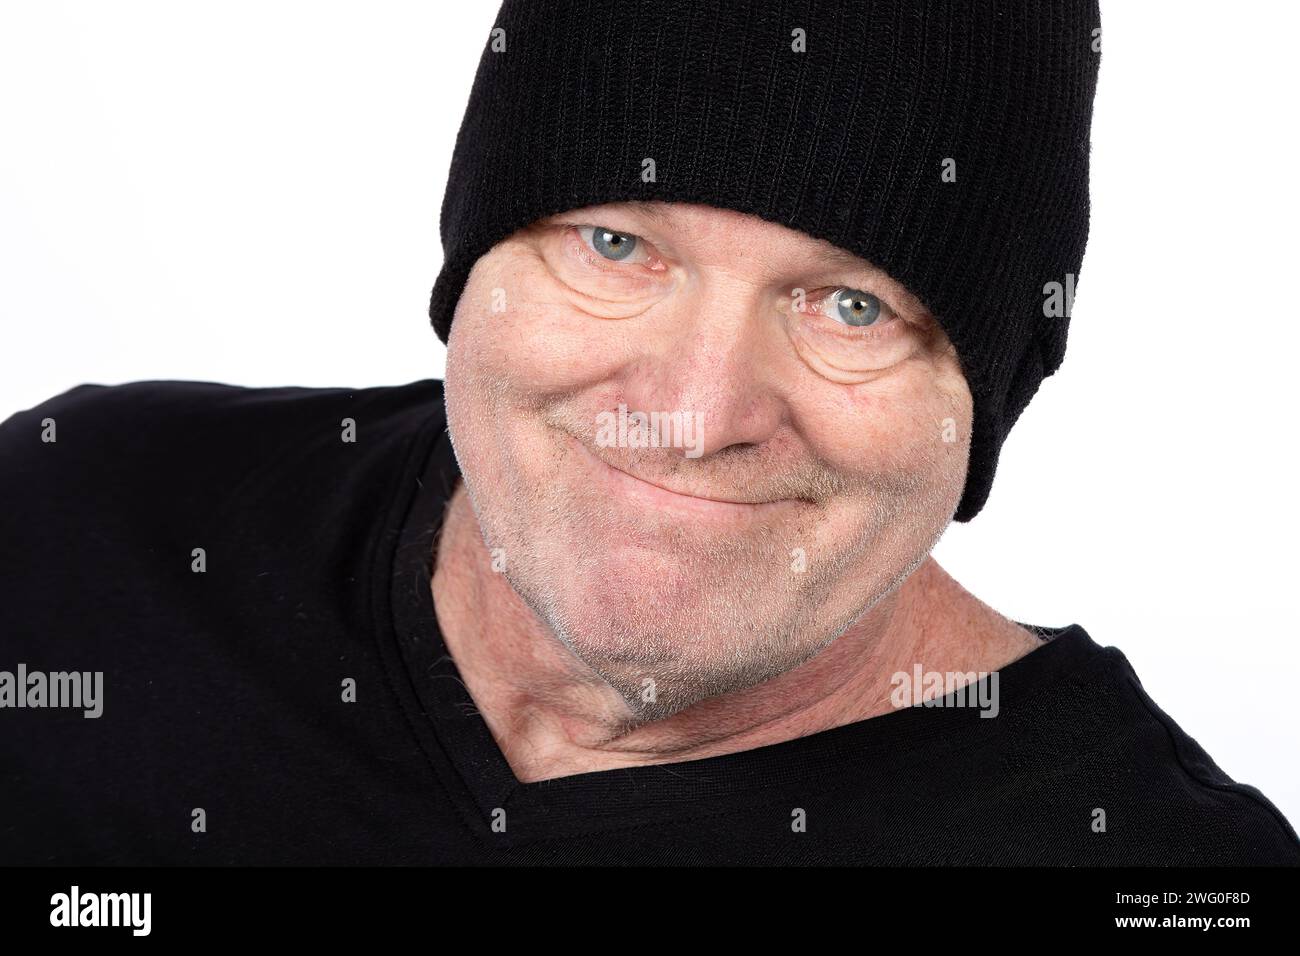 Smiling Middle-Aged Man in Black T-Shirt and Hat, Confident Portrait on White Background - Casual Lifestyle and Fashion for Mature Adults Stock Photo